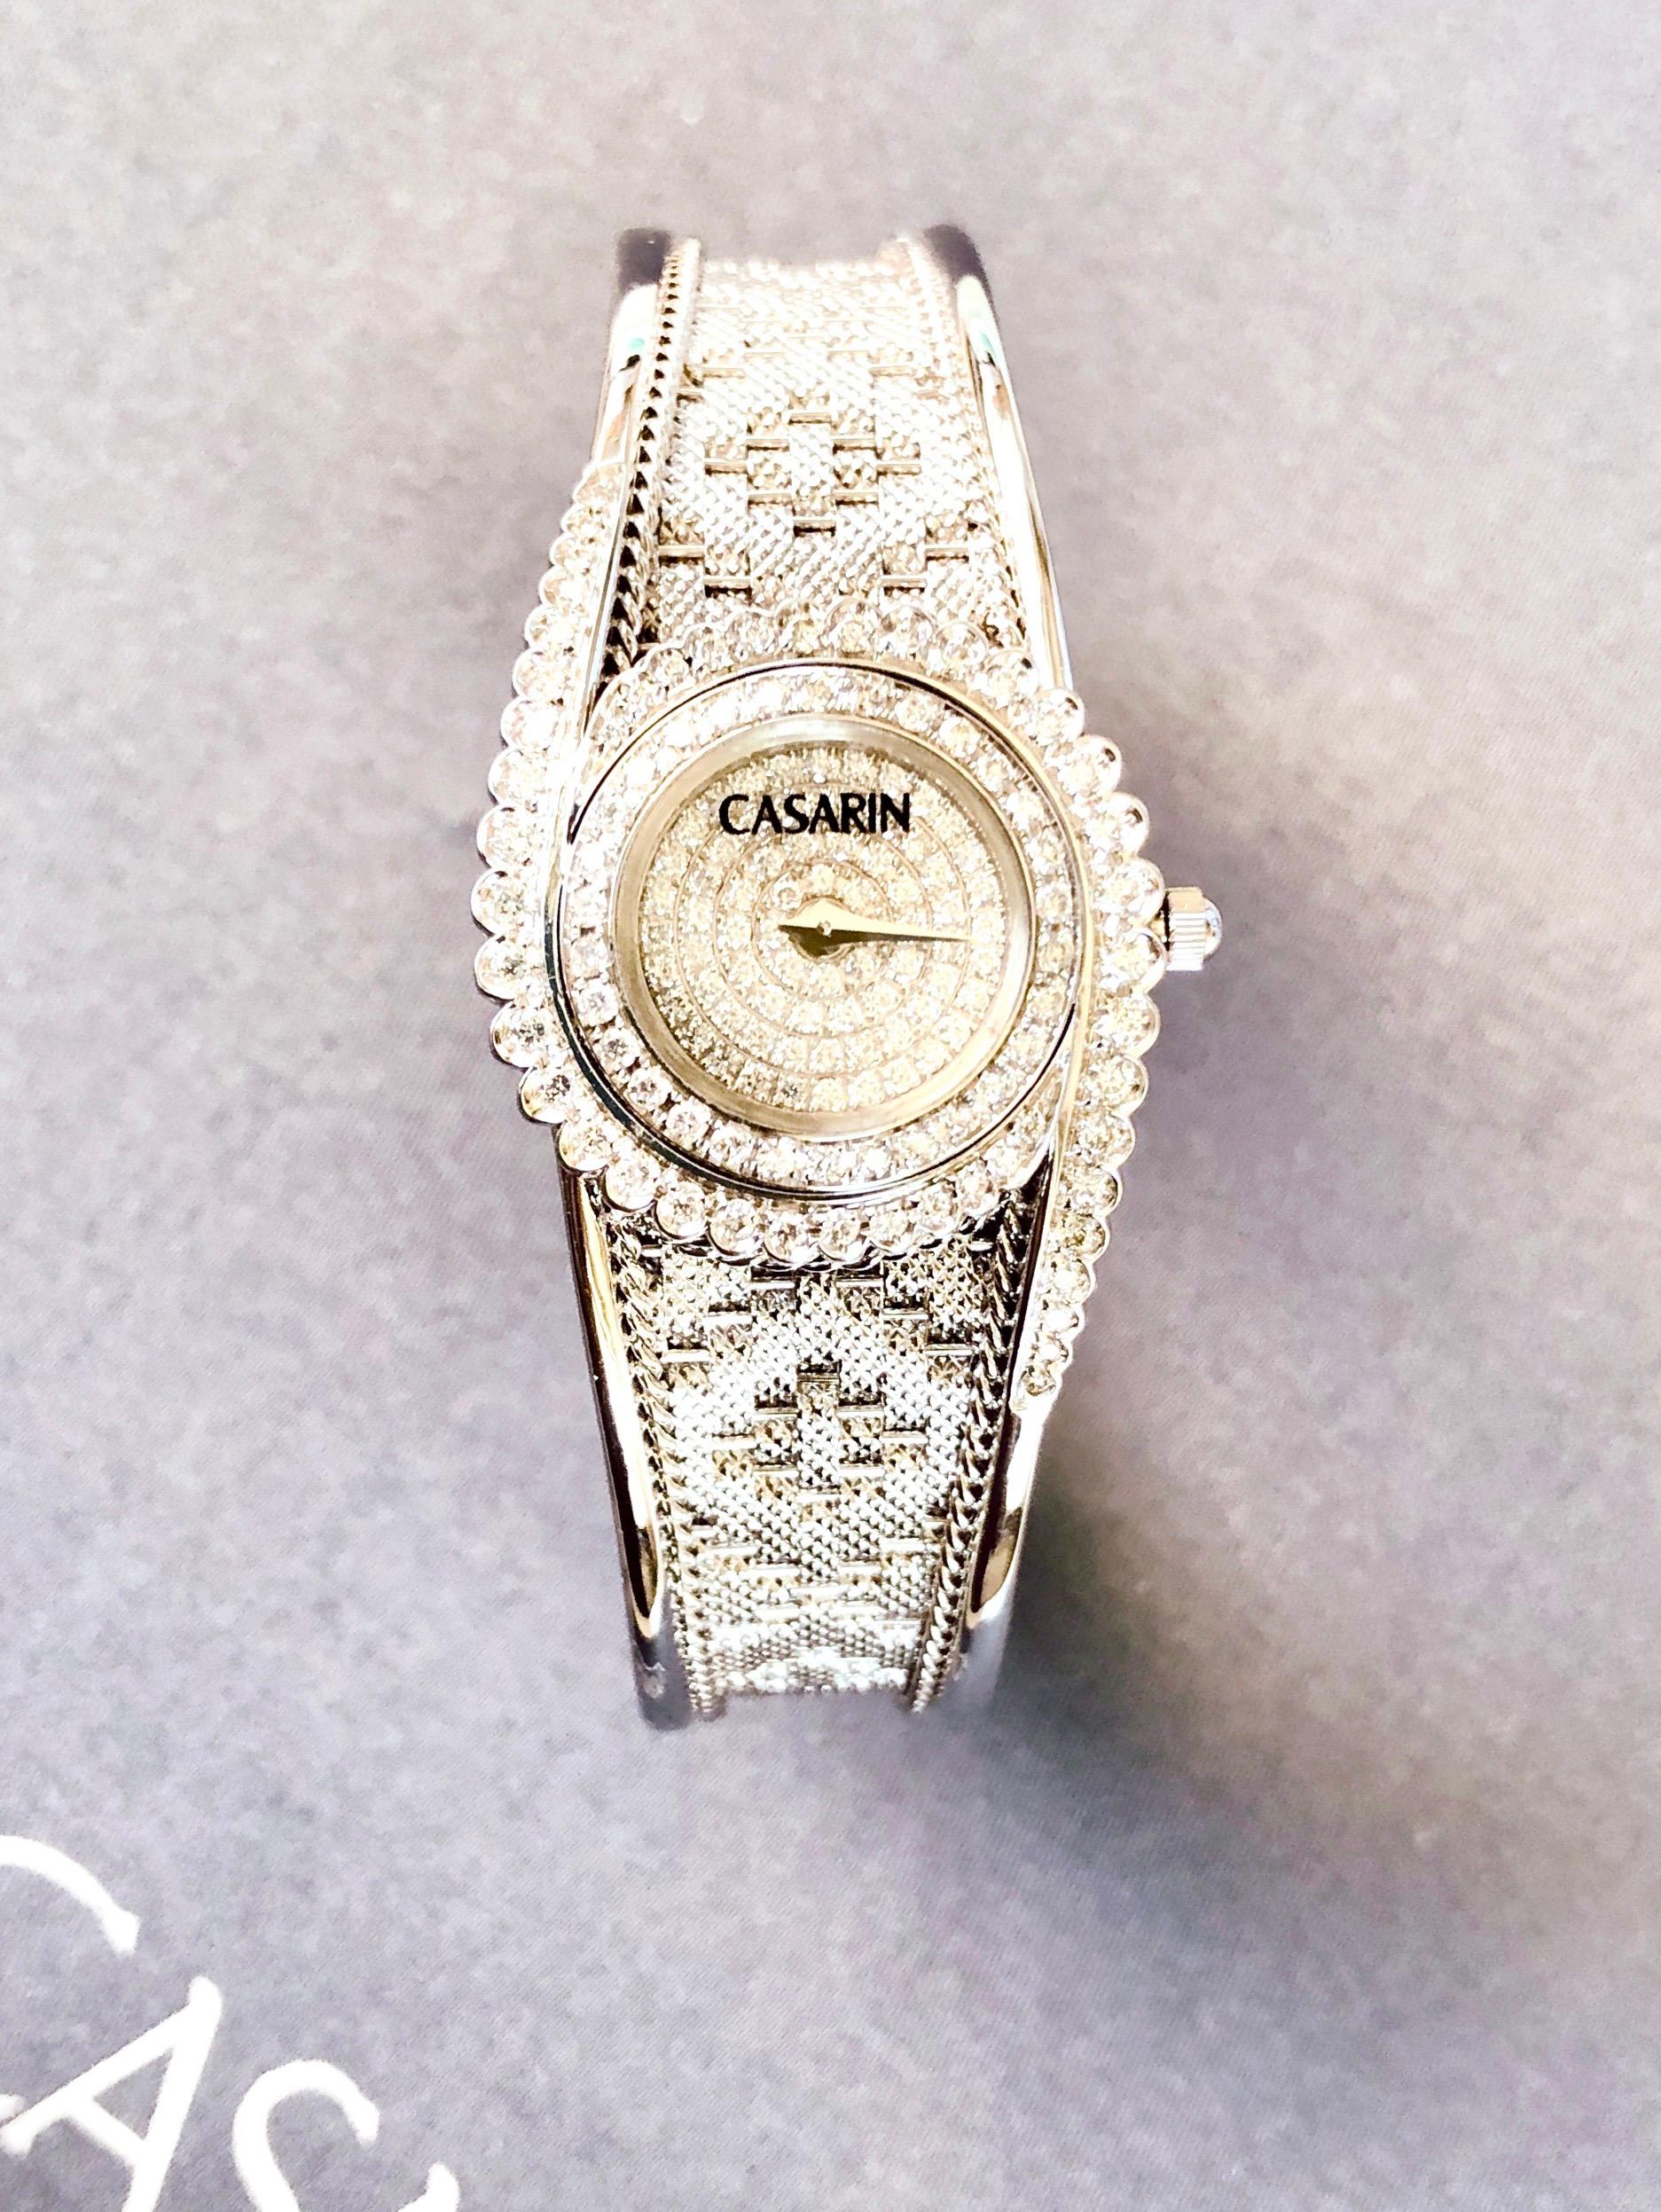 Timeless and fine White Gold watch, Quartz movement, with Diamonds ct. 1,37, handmade in Italy by Roberto Casarin.

A uniqie and intricate design, entirely handmade. The bracelet is made of small links, togheter recreating a  fabric-like texture and